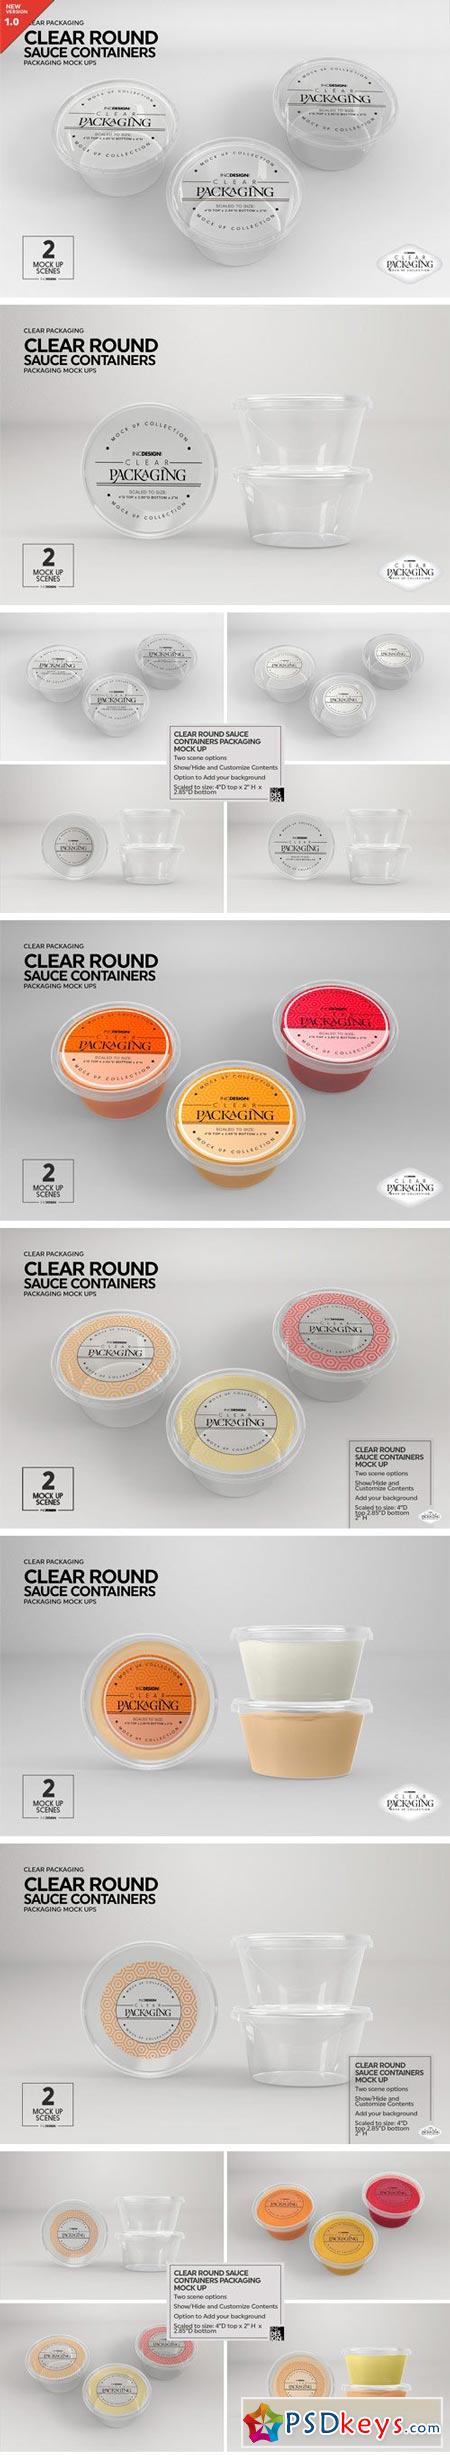 Download Clear Round Sauce Containers MockUp 2221803 » Free Download Photoshop Vector Stock image Via ...